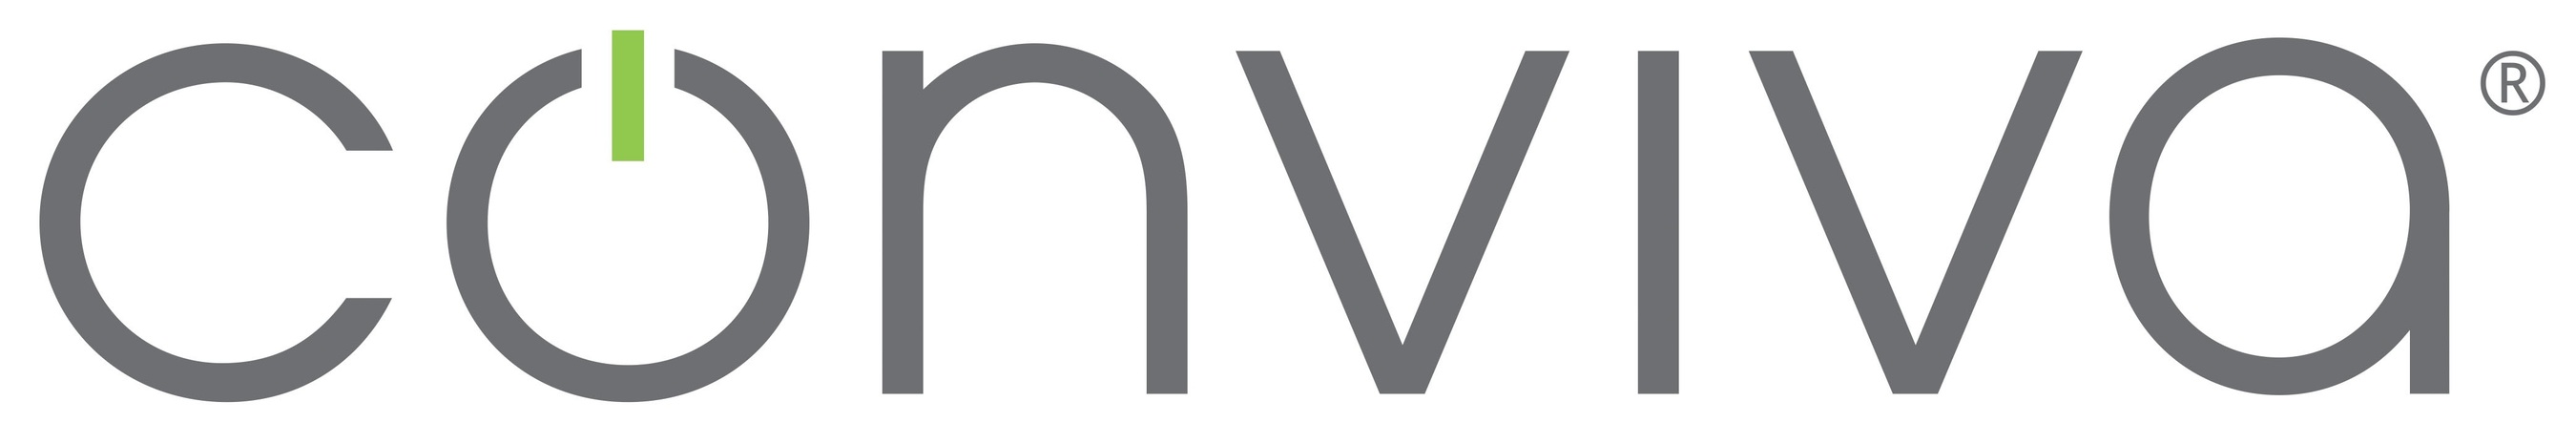 Conviva Announces Revolutionary New Ad Insights Products